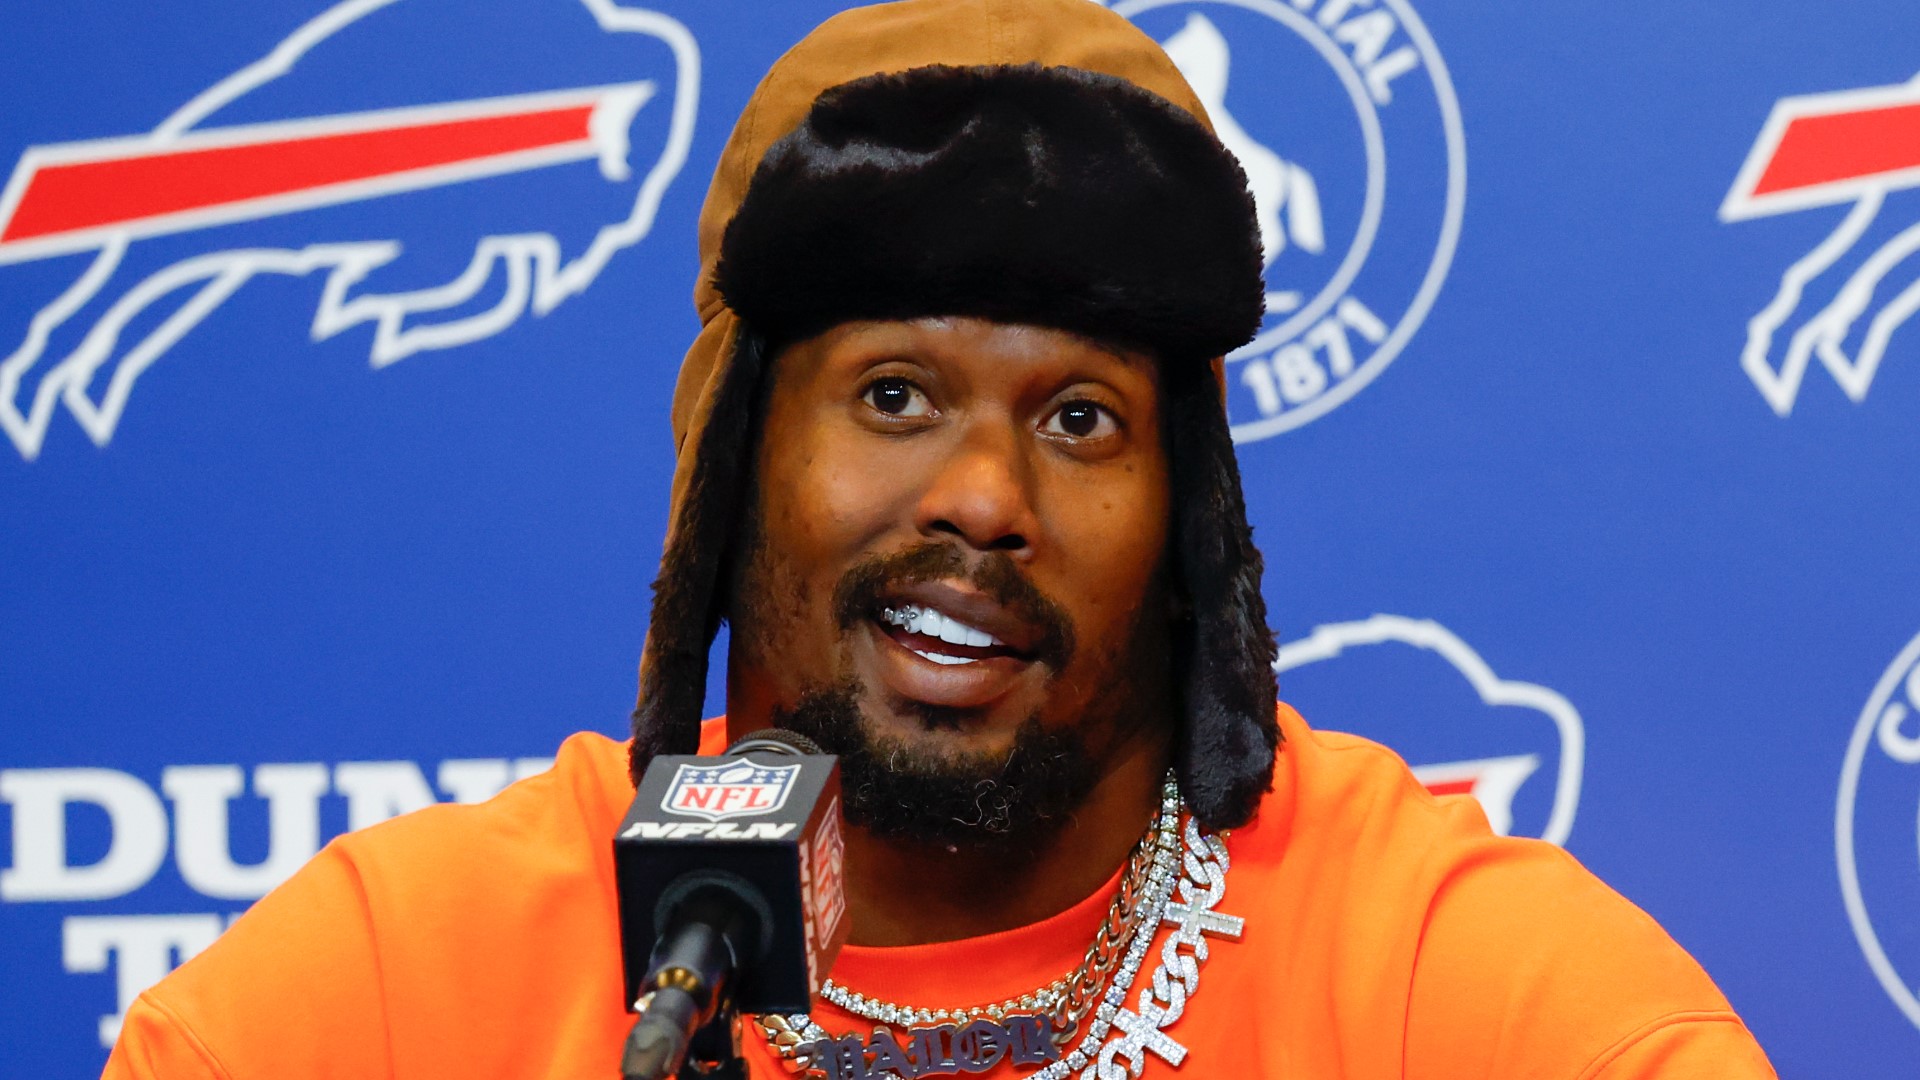 Bills linebacker Von Miller spoke with the media ahead of Buffalo's Week 9 game with the New York Jets in East Rutherford, N.J.